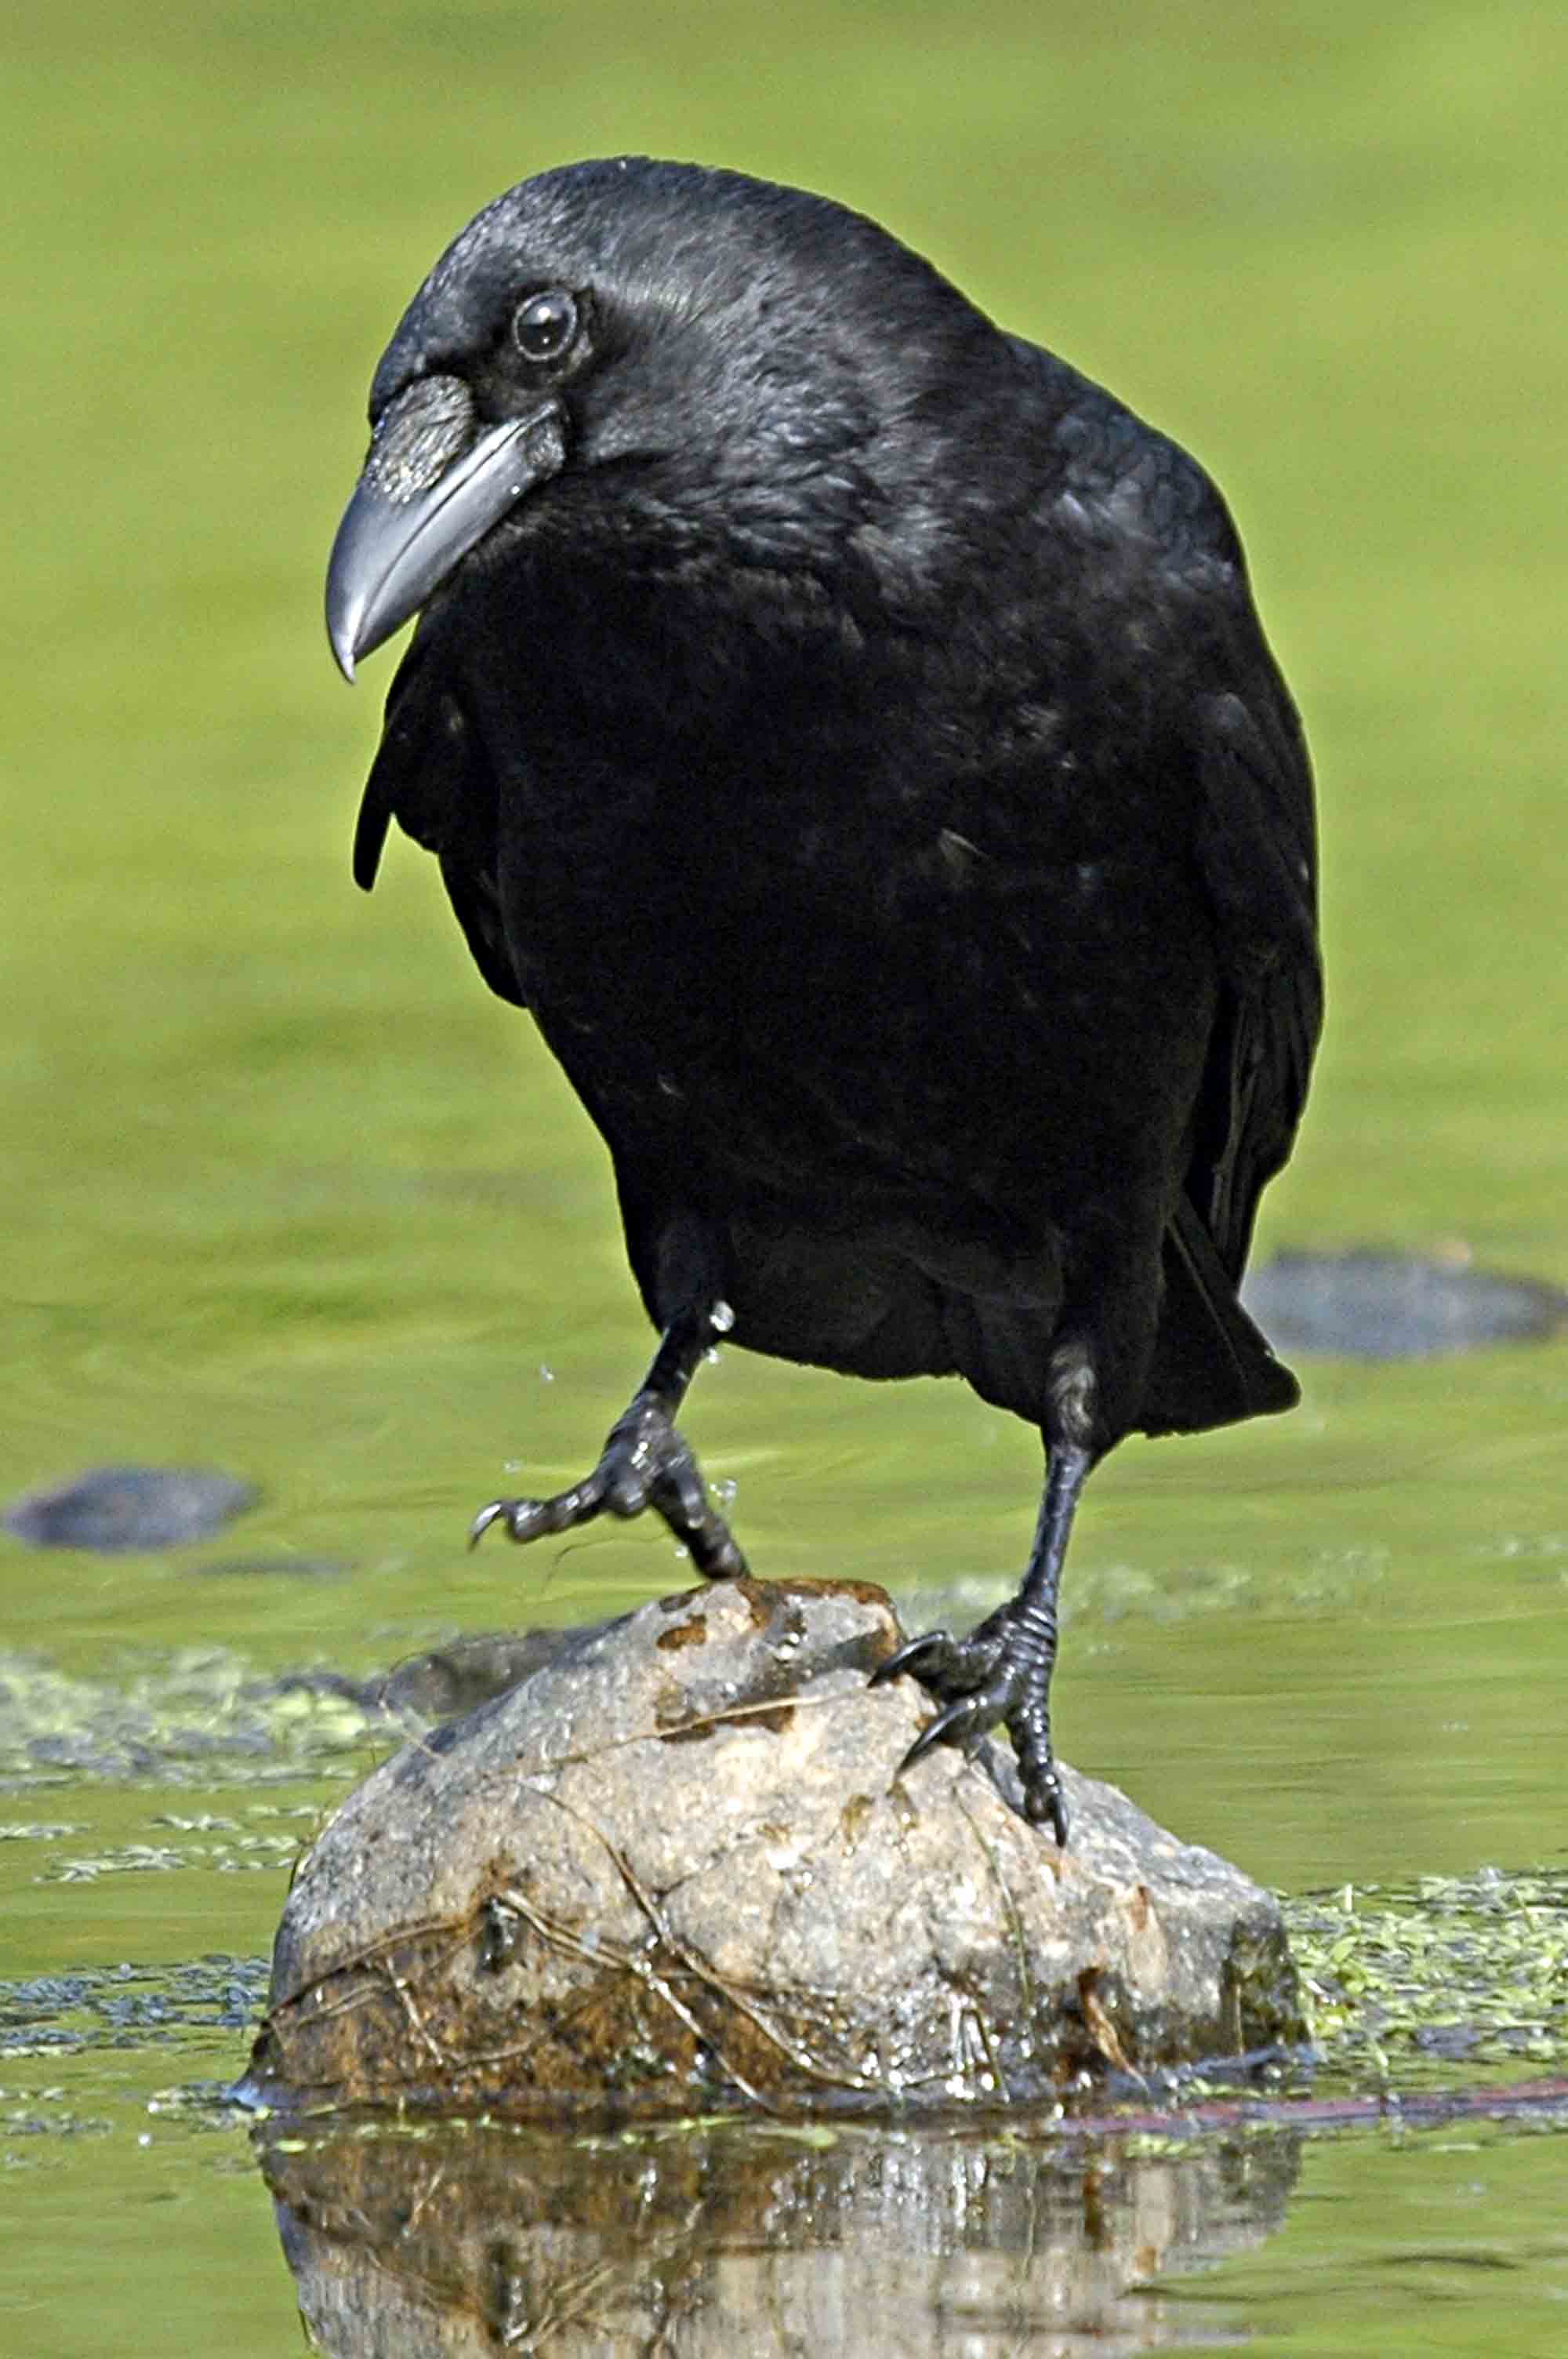 Pretty Carrion crow